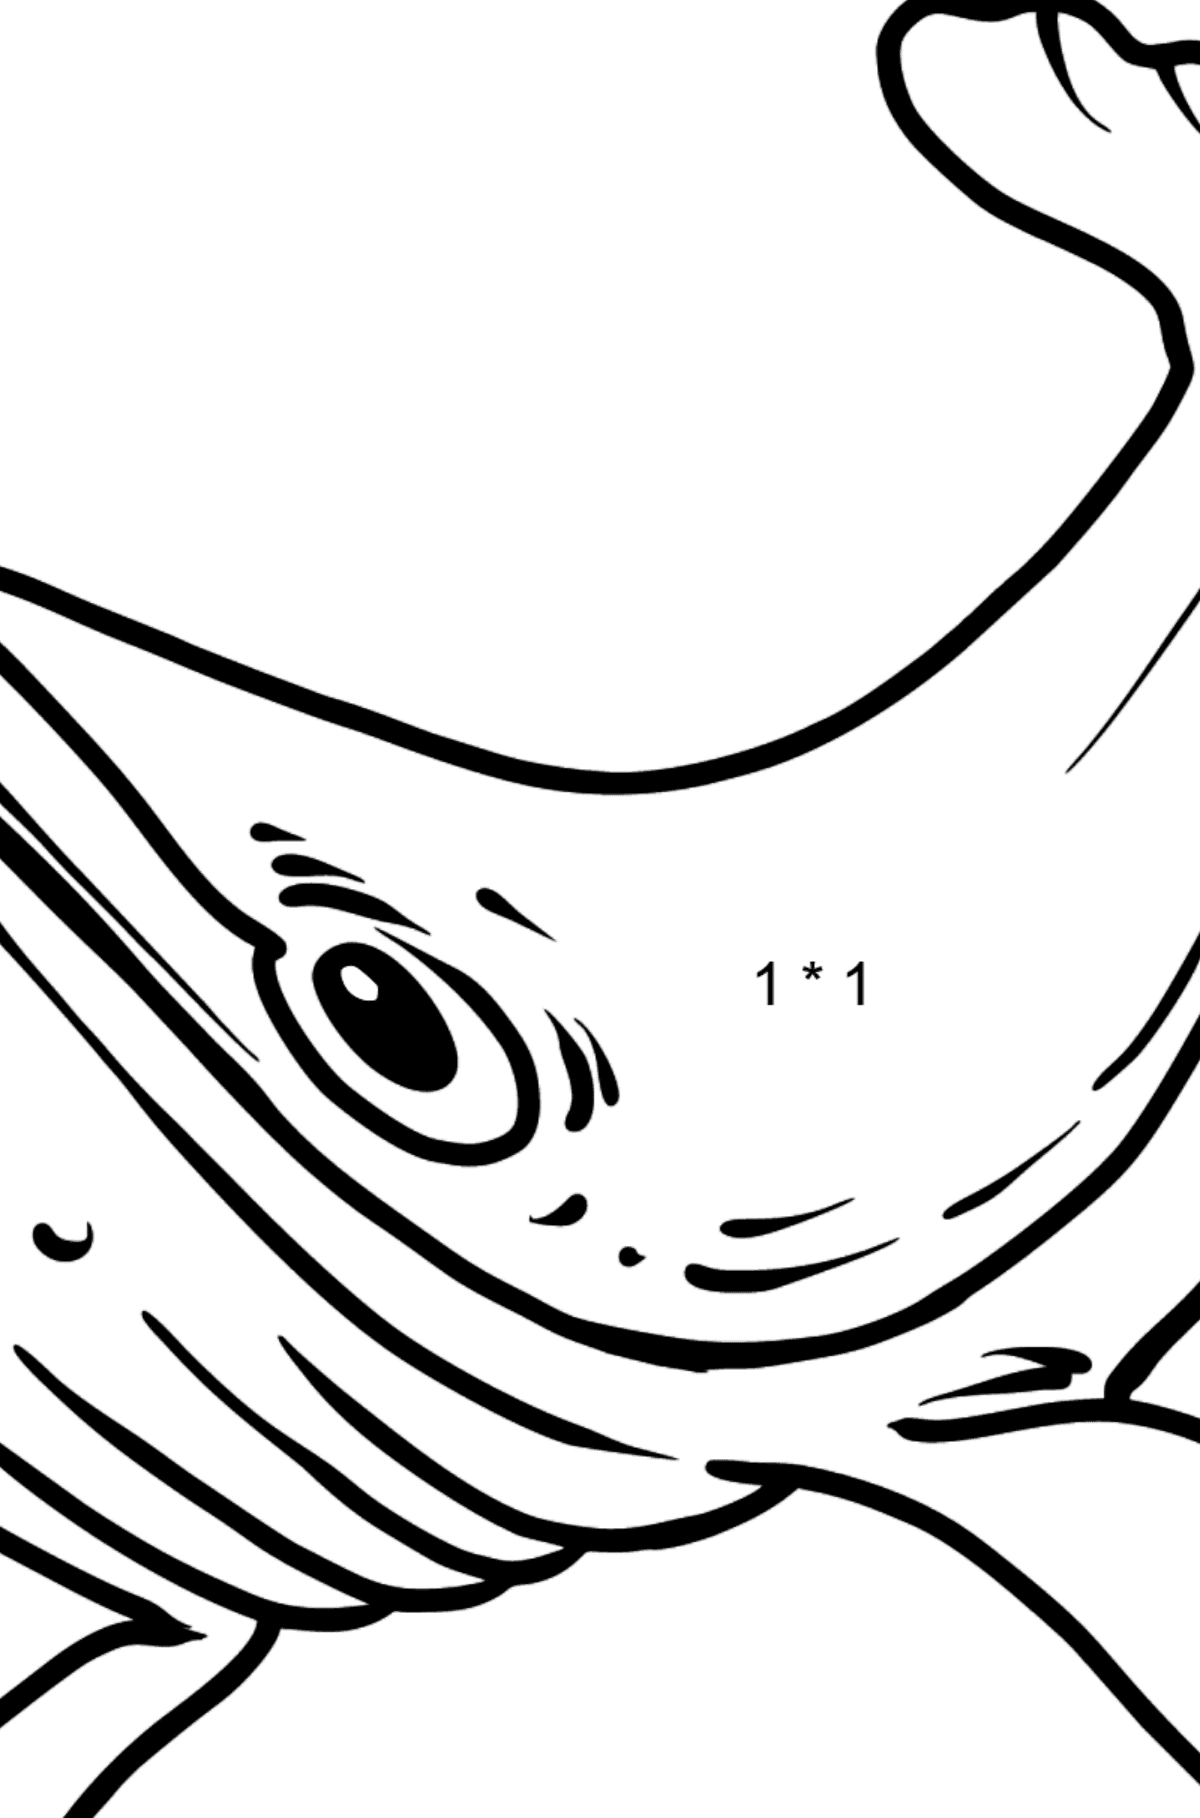 Whale coloring page - Math Coloring - Multiplication for Kids